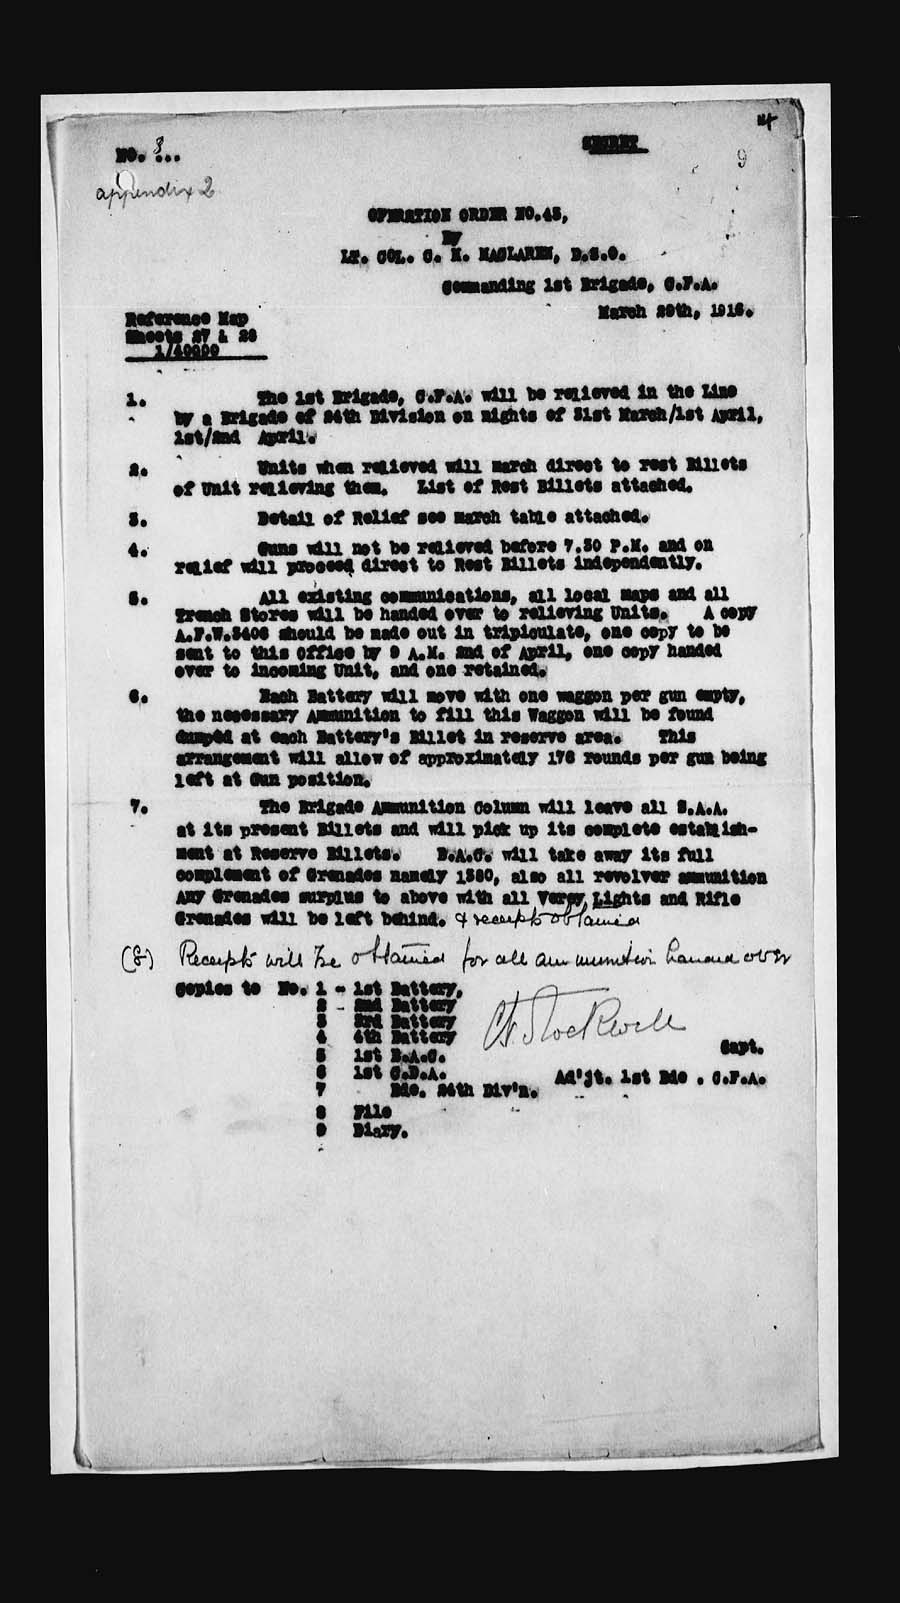 War Diaries 1st. Bde. C.F.A Appendix 8 Page 2 Operation Order No. 43 March 29,1916